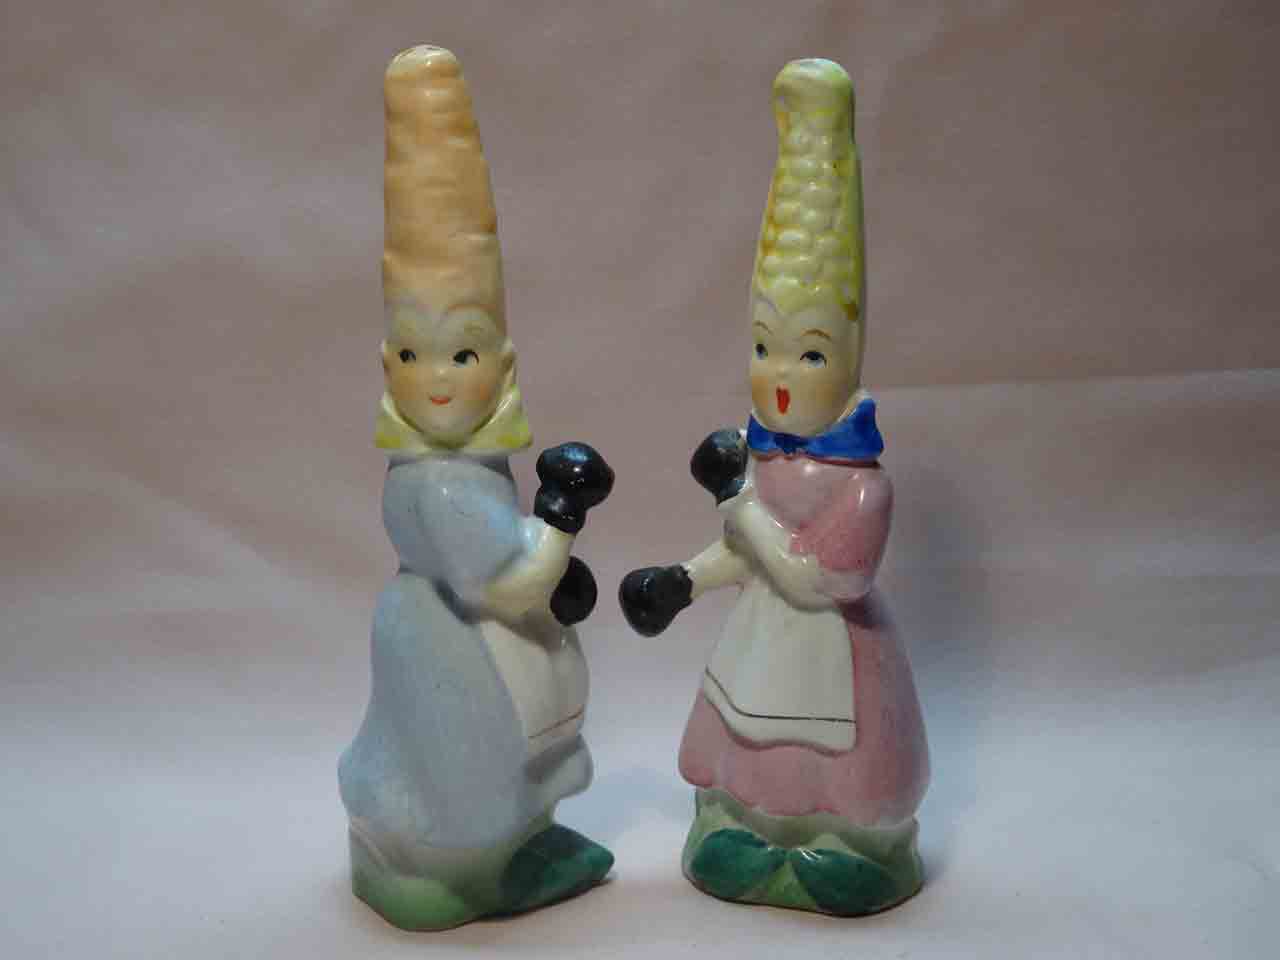 Boxing match - anthropomorphic boxing vegetable girls salt and pepper shakers